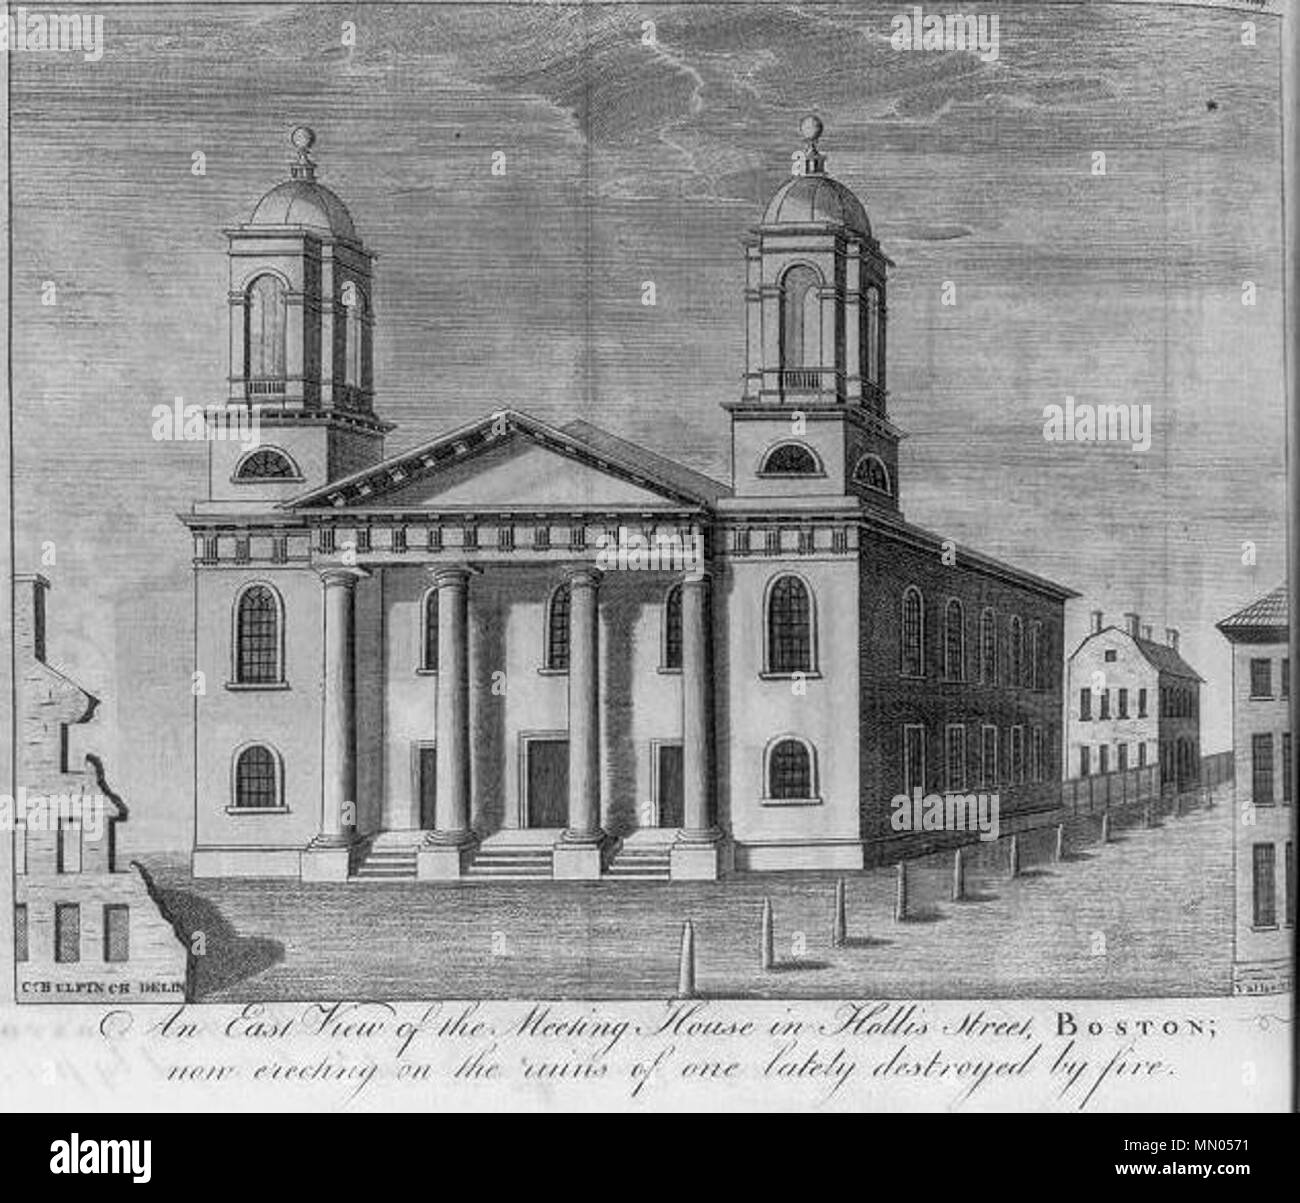 . English: An east view of the meeting house in Hollis Street, Boston, now erecting on the ruins of one lately destroyed by fire / C. Bulfinch delin. ; Vallance sc.  . 1788.  Bulfinch, Charles, 1763-1844 , artist Vallance, J. (John), 1770-1823, engraver Hollis Street Church, Boston, Massachusetts (1788) Stock Photo